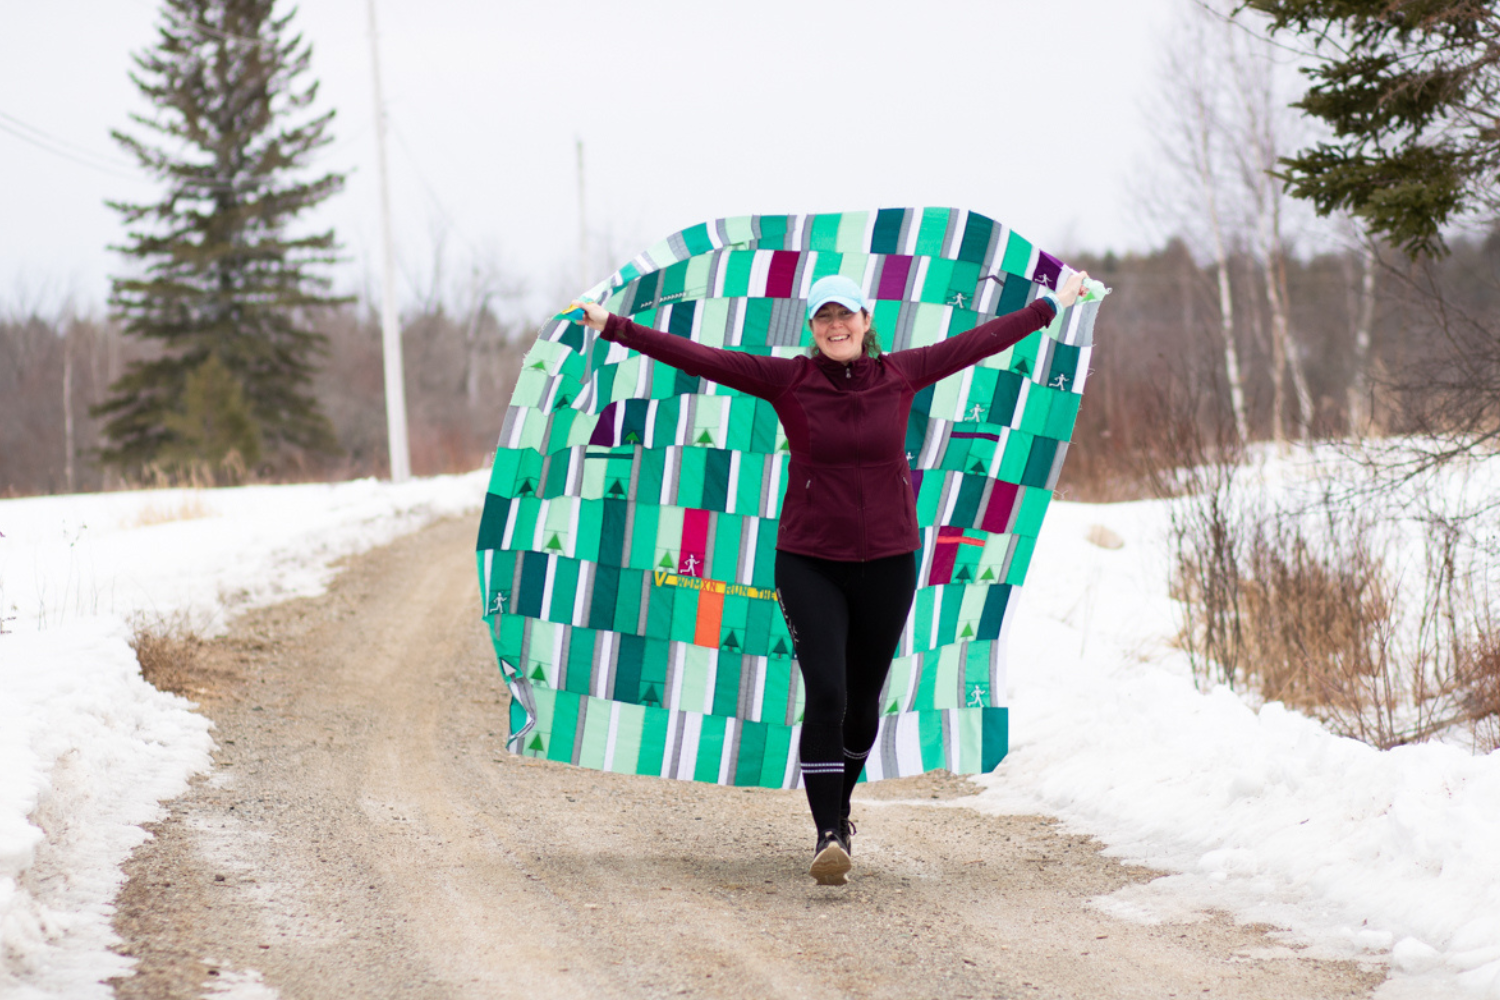 Kitty smiles and holds up her My 2020 Miles Quilt behind her as she walks down a gravel road with snow on either side of the road. A gray sky and bare brown trees, and one tall green fir tree, are behind her. Kitty is wearing black pants, a burgundy long-sleeved top and a mint green baseball cap. The quilt is comprised of small mostly green blocks (in both dark green and shades of lighter green), with a few white, red and orange blocks.